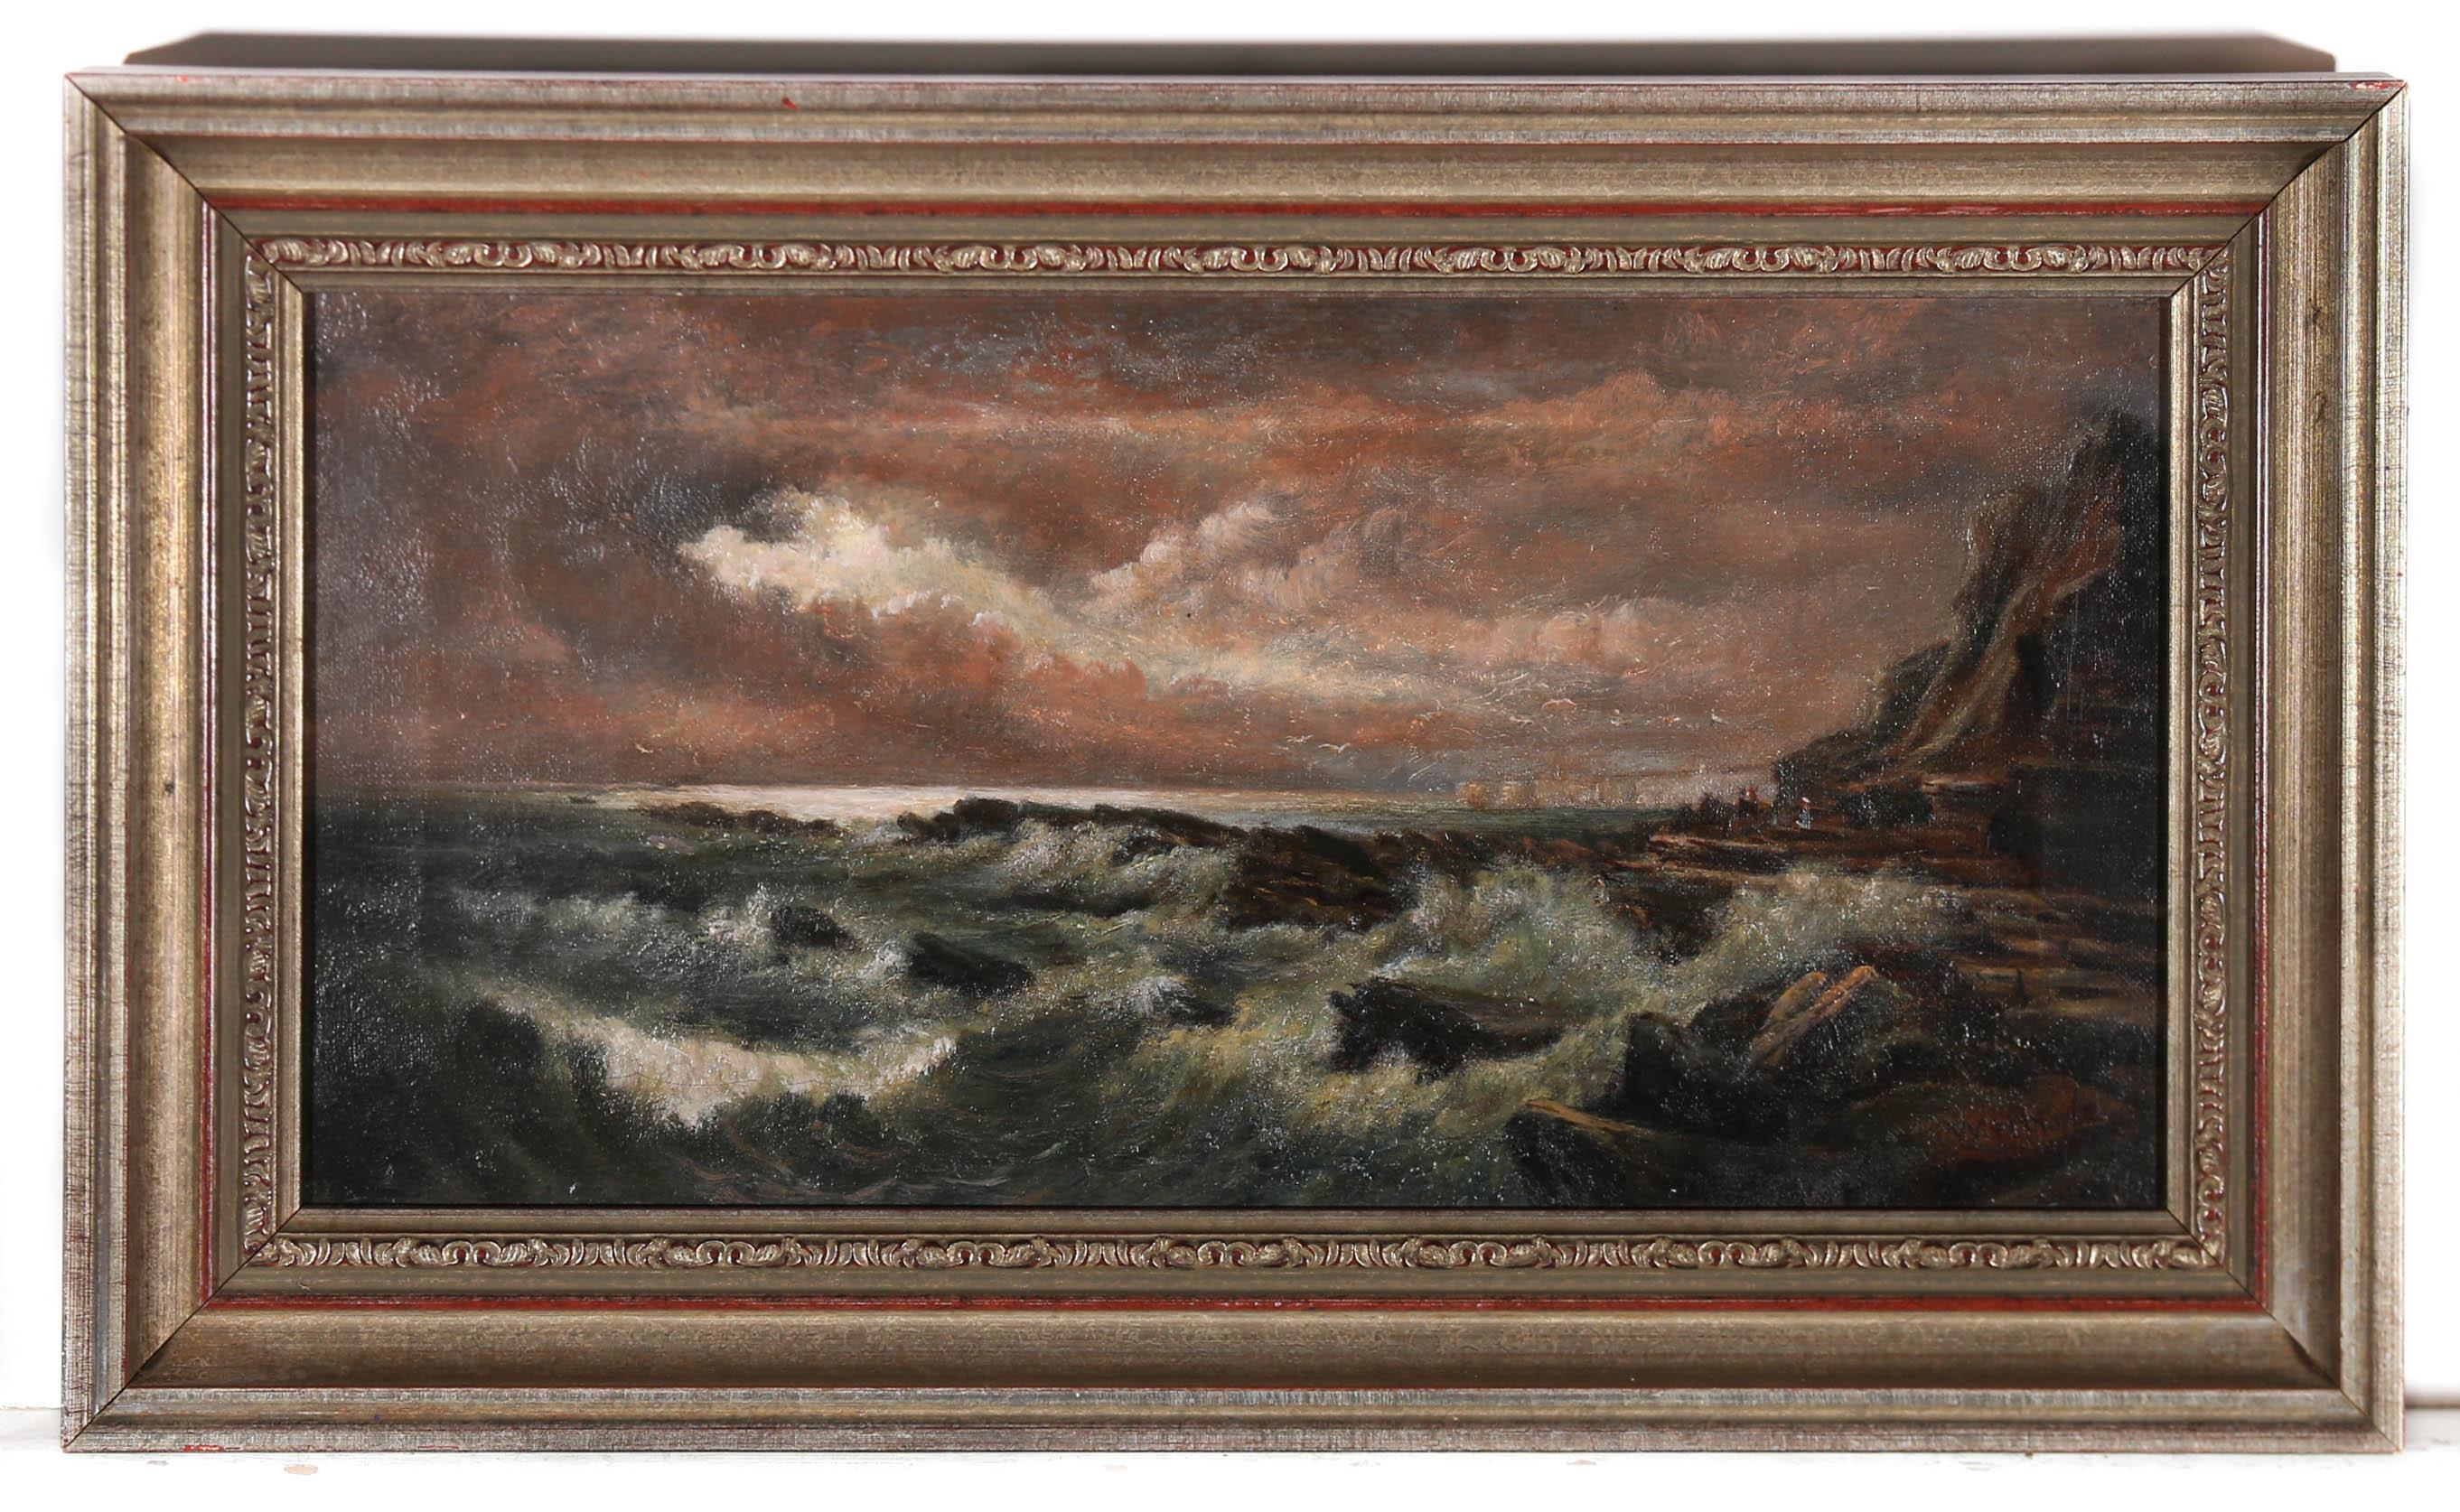 W.H Hoyle - Late 19th Century Oil, Filey Brigg, North Yorkshire 1